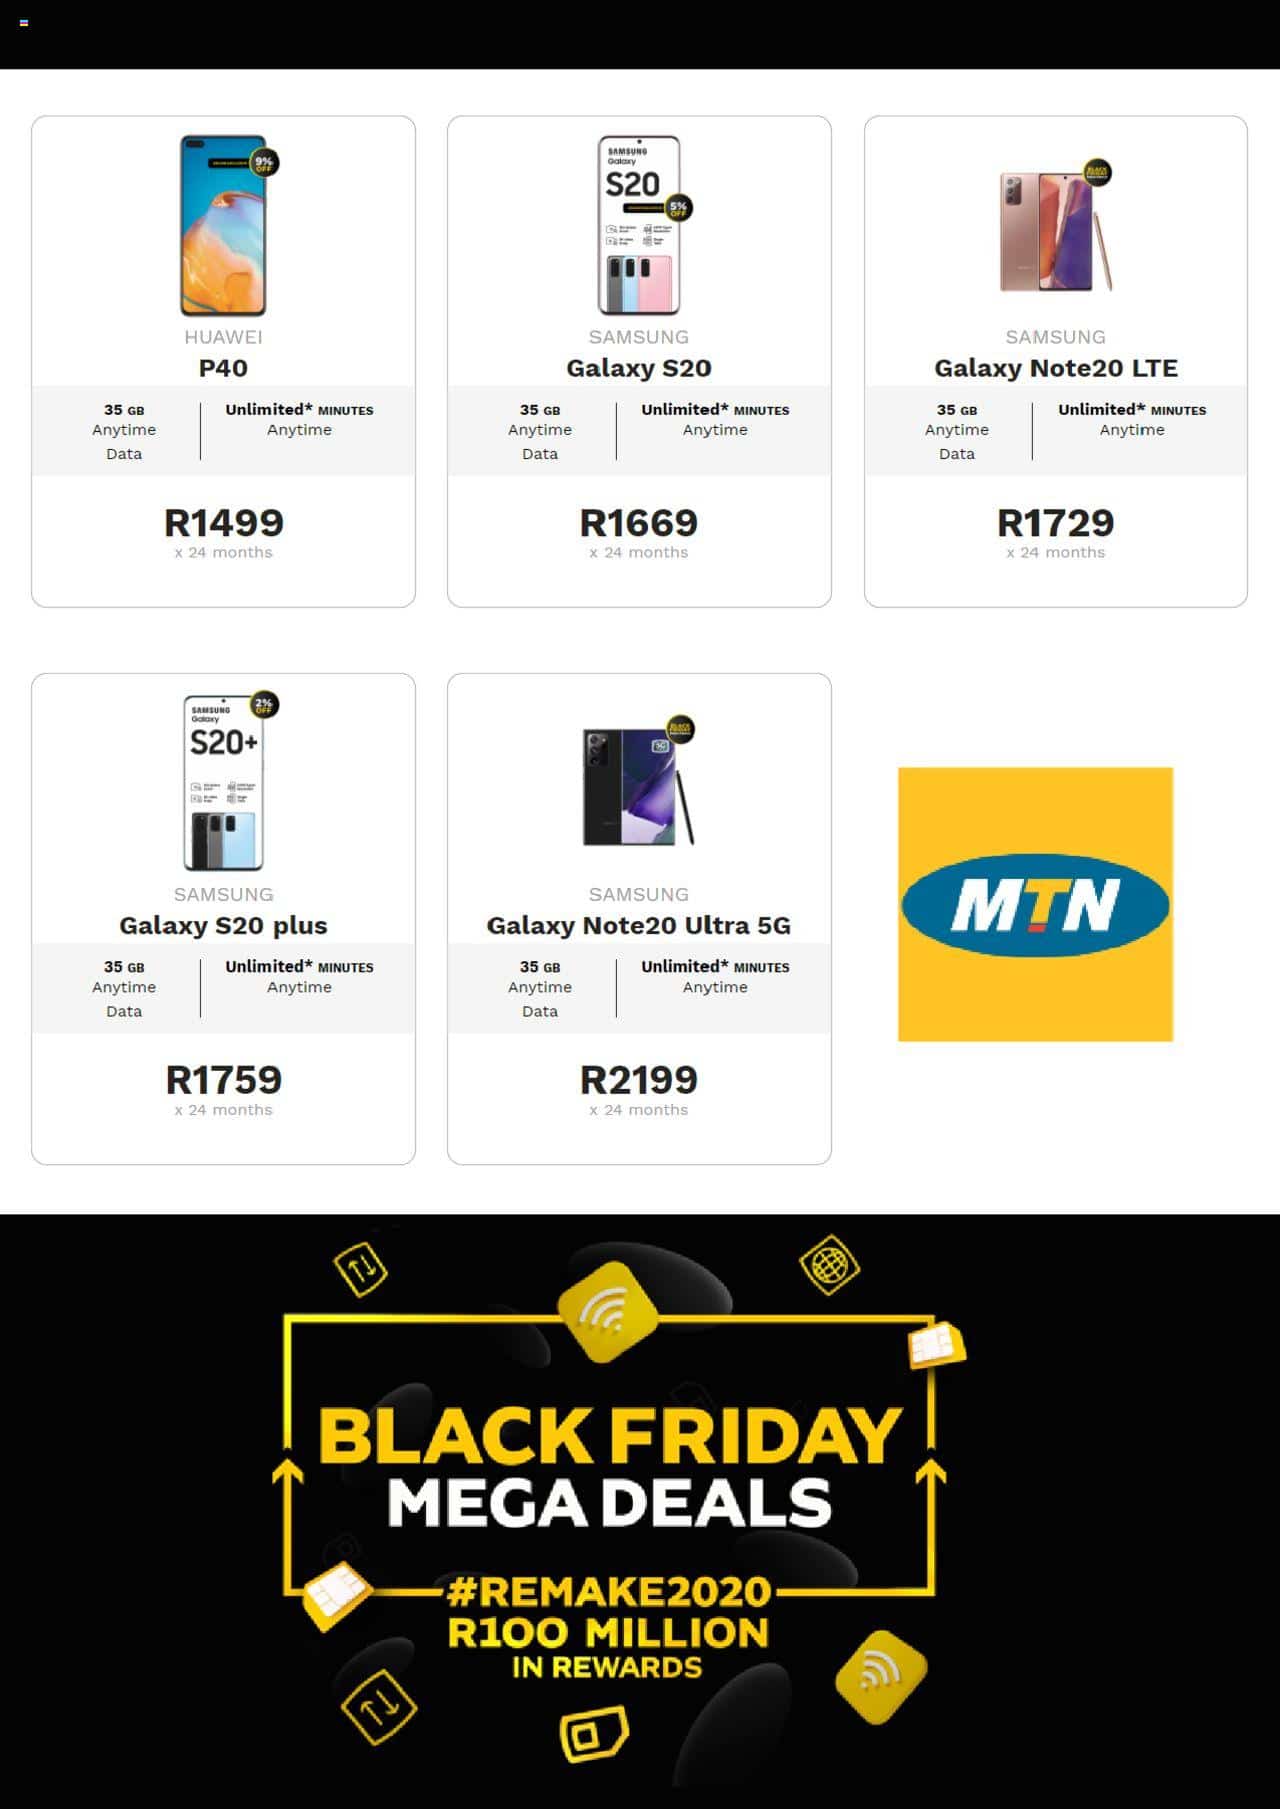 MTN Black Friday Deals & Specials 2021 - What Online Stores Have The Best Black Friday Deals